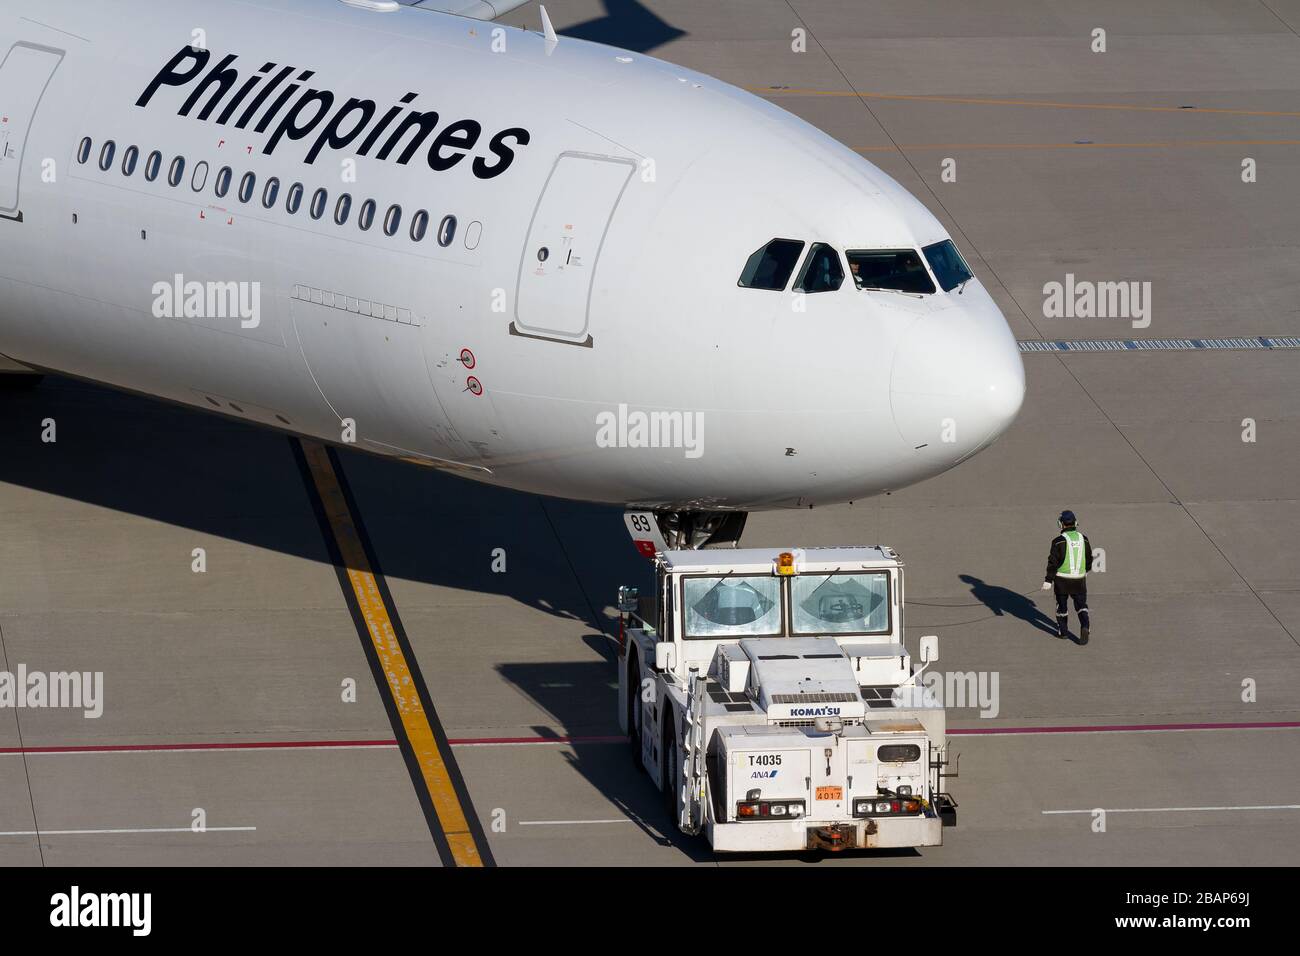 A Philippine Airlines Airbus A330-300 at Haneda International Airport, Tokyo, Japan. Stock Photo